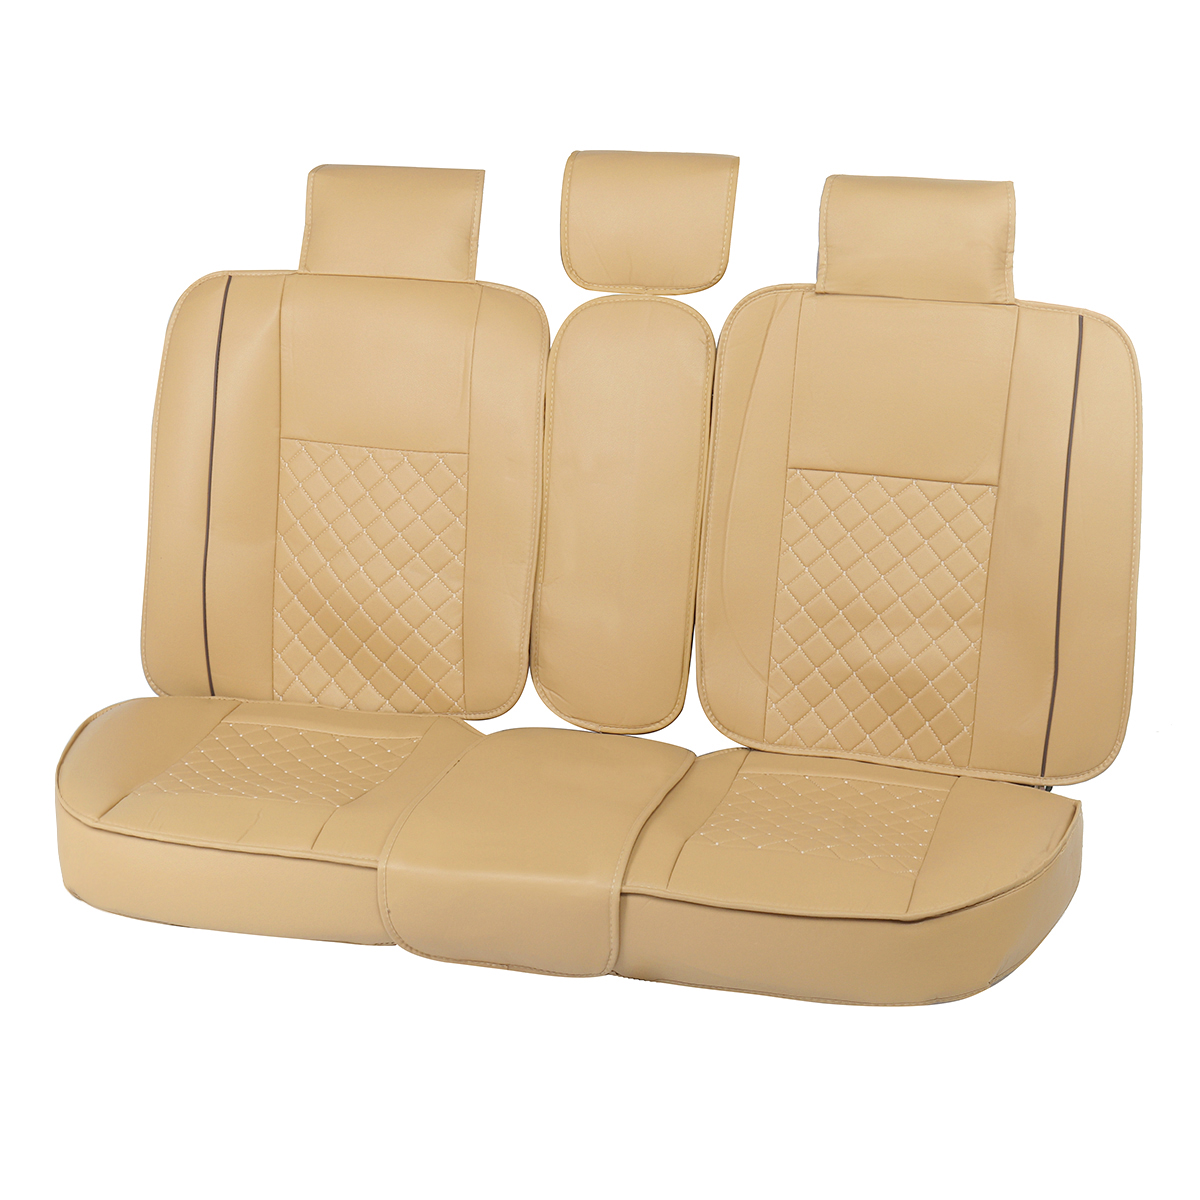 5PCS Universal Car Seat Covers Full Set Waterproof PU Leather Covers Front Rear Split Bench Protection Easy Install Fit Auto Truck Van SUV - Auto GoShop